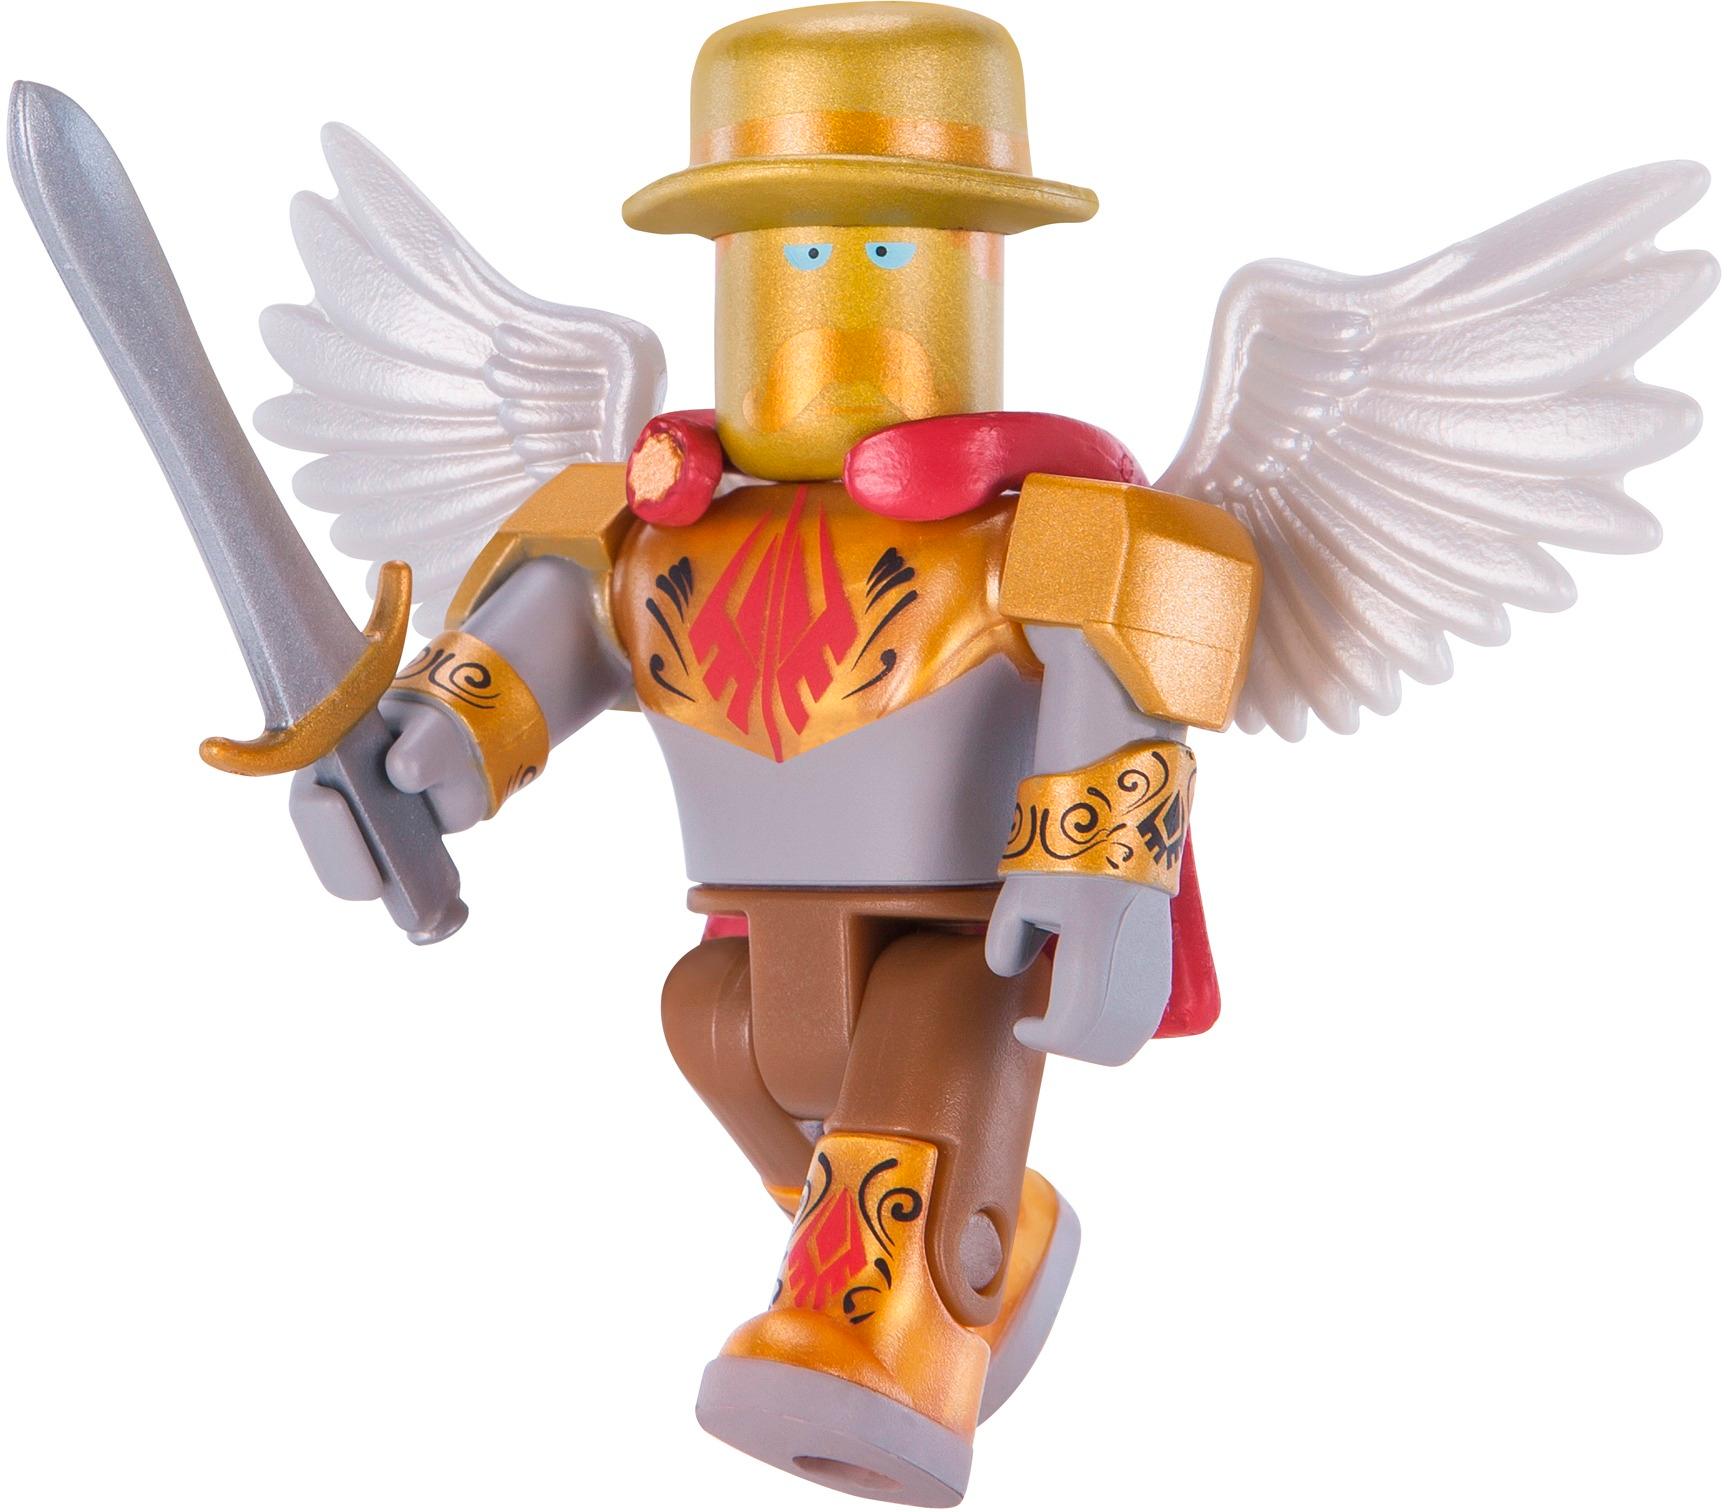 Customer Reviews Roblox Core Figure Styles May Vary 10705 Best Buy - jazwares roblox imagination articulated figure styles may vary rob0268 best buy